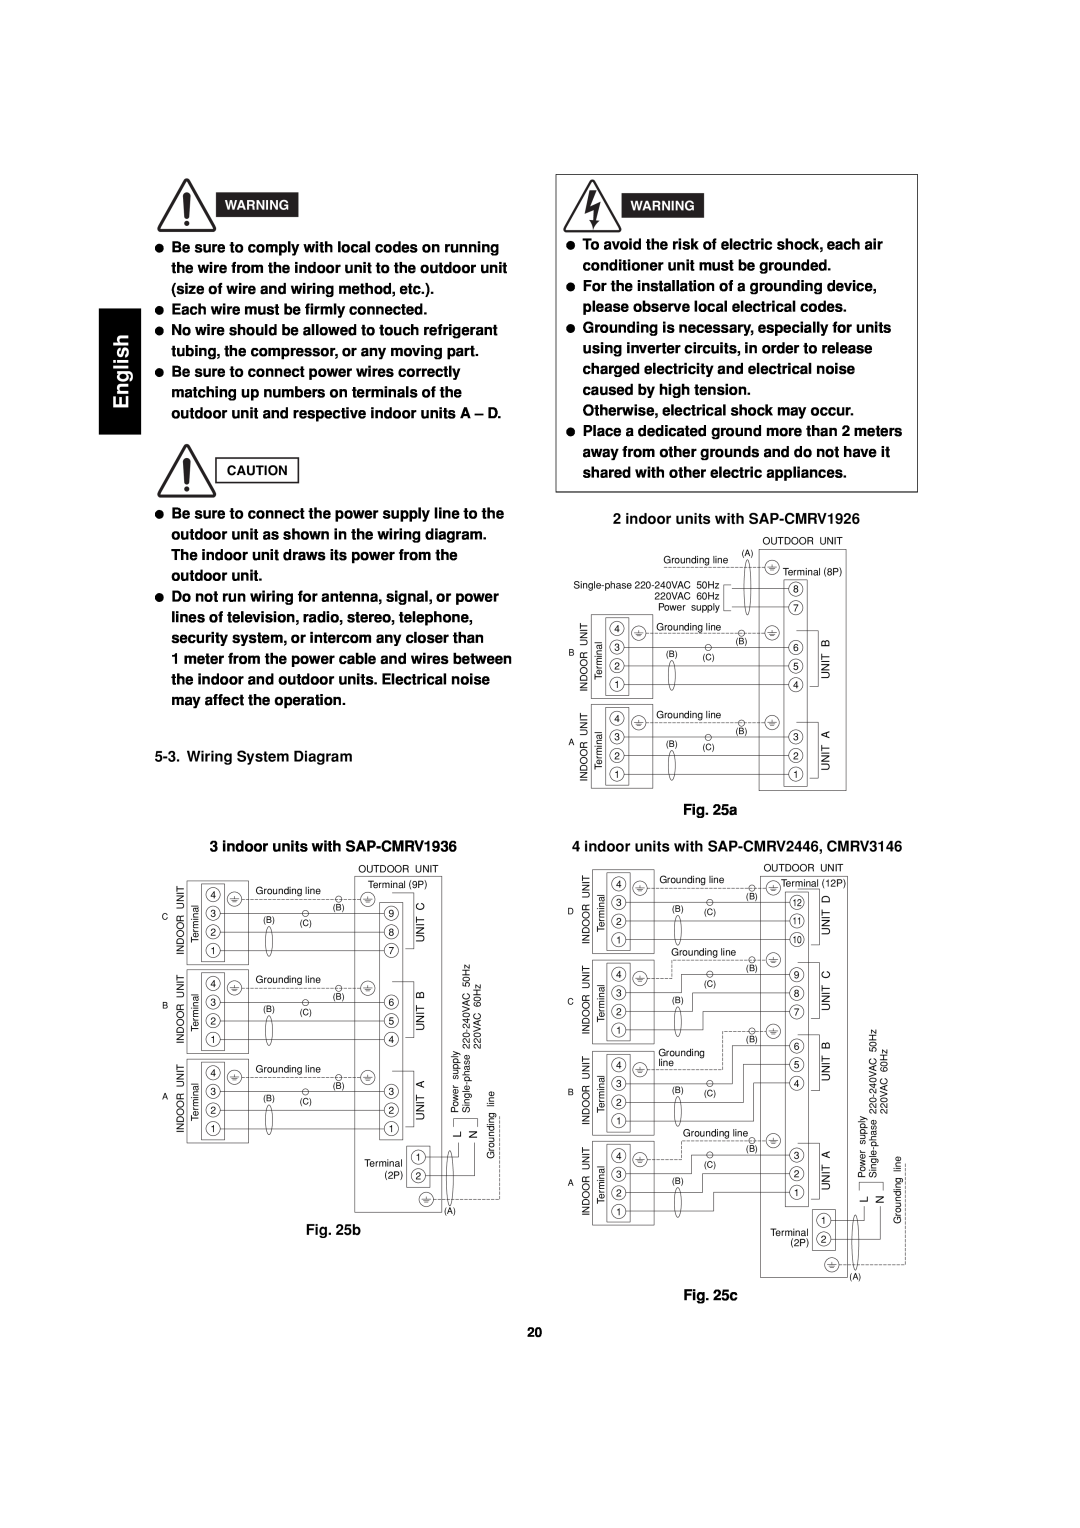 Sanyo SAP-CMRV1426EH-F English, Each wire must be firmly connected, Wiring System Diagram, indoor units with SAP-CMRV1936 